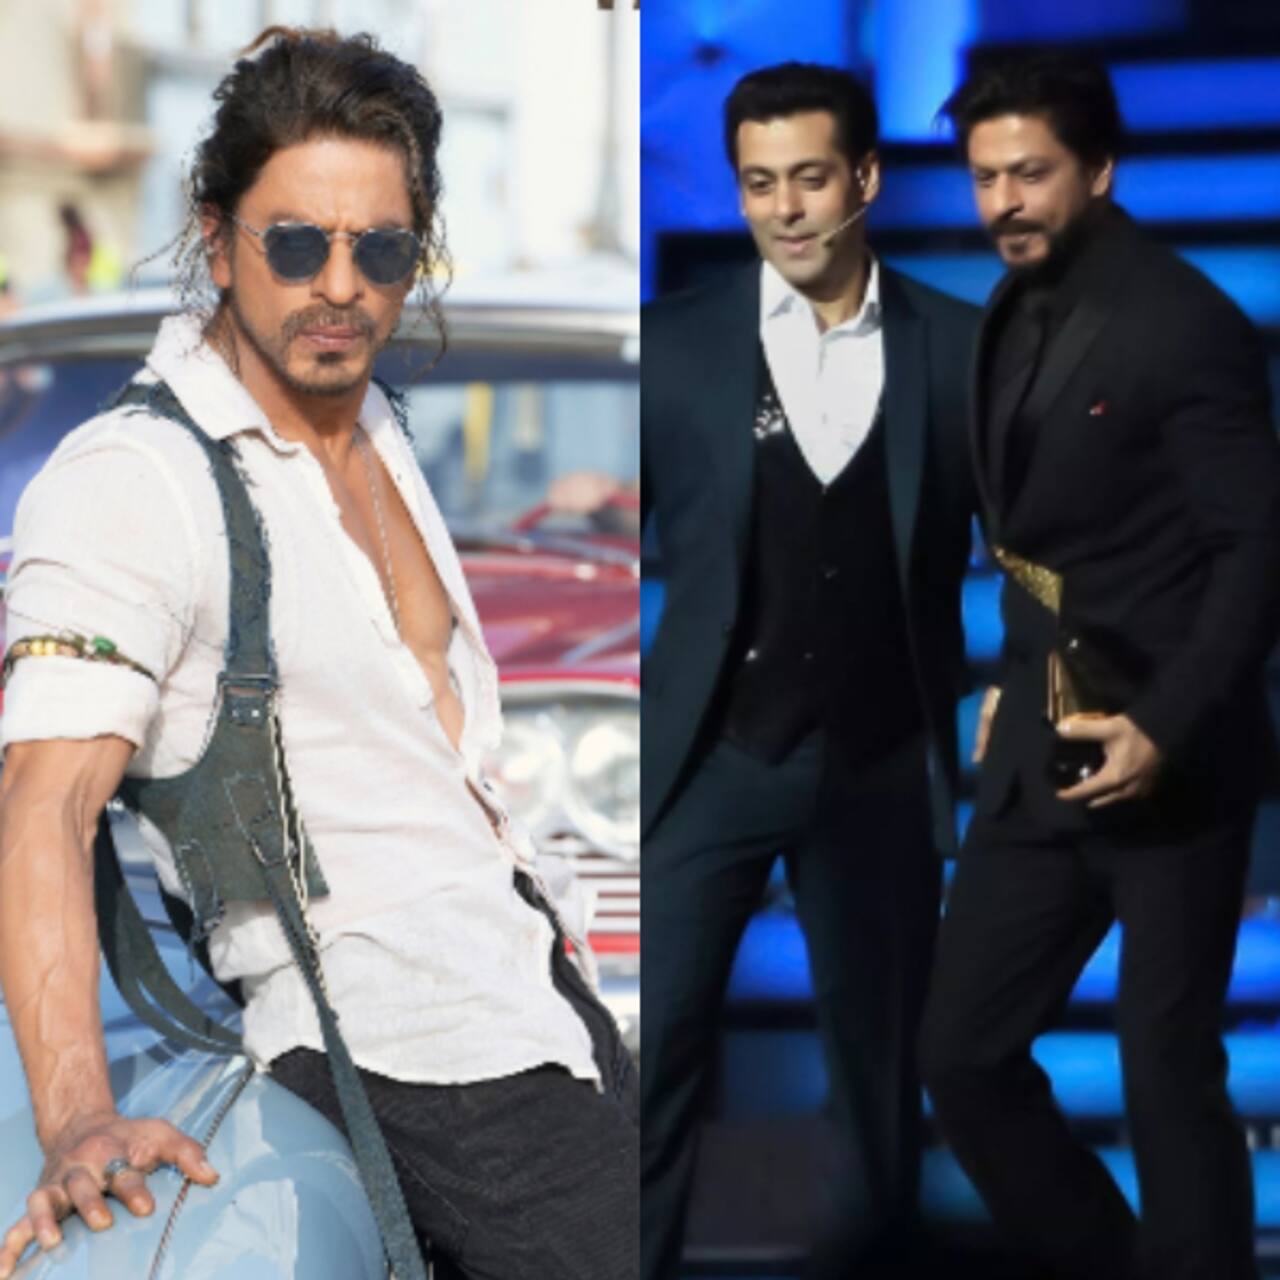 Pathaan: Shah Rukh Khan reveals at what point fans can expect to see Salman Khan in the action thriller